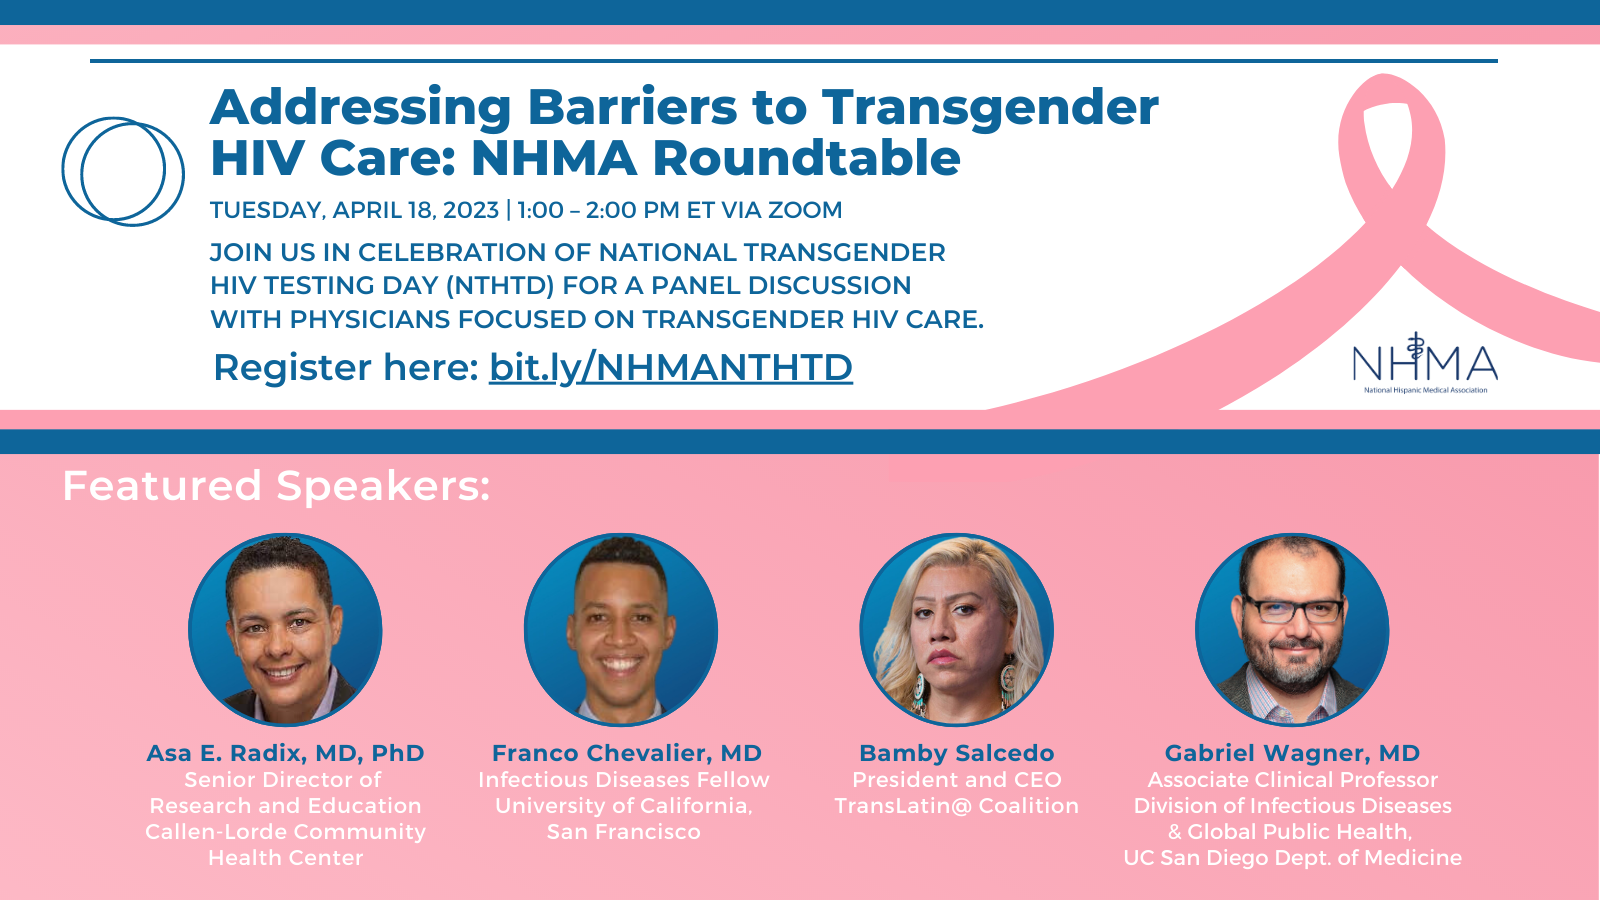 Addressing Barriers to Transgender HIV Care: NHMA Roundtable 